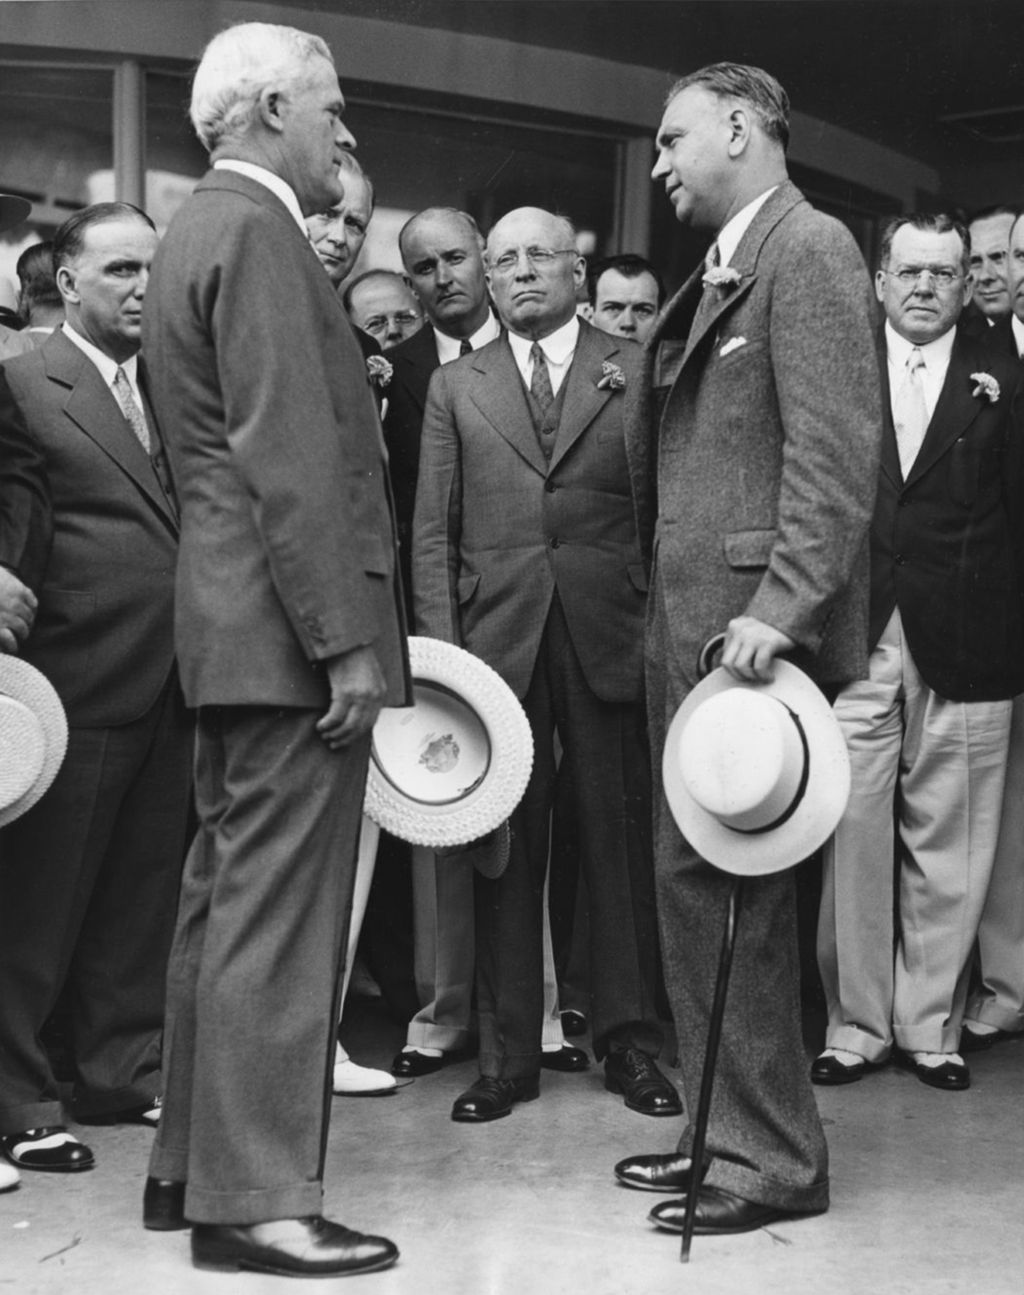 Thomas E. Wilson (left), chairman of the board of directors of Wilson and company, shown presenting the Wilson exhibit building to the World's Fair administration